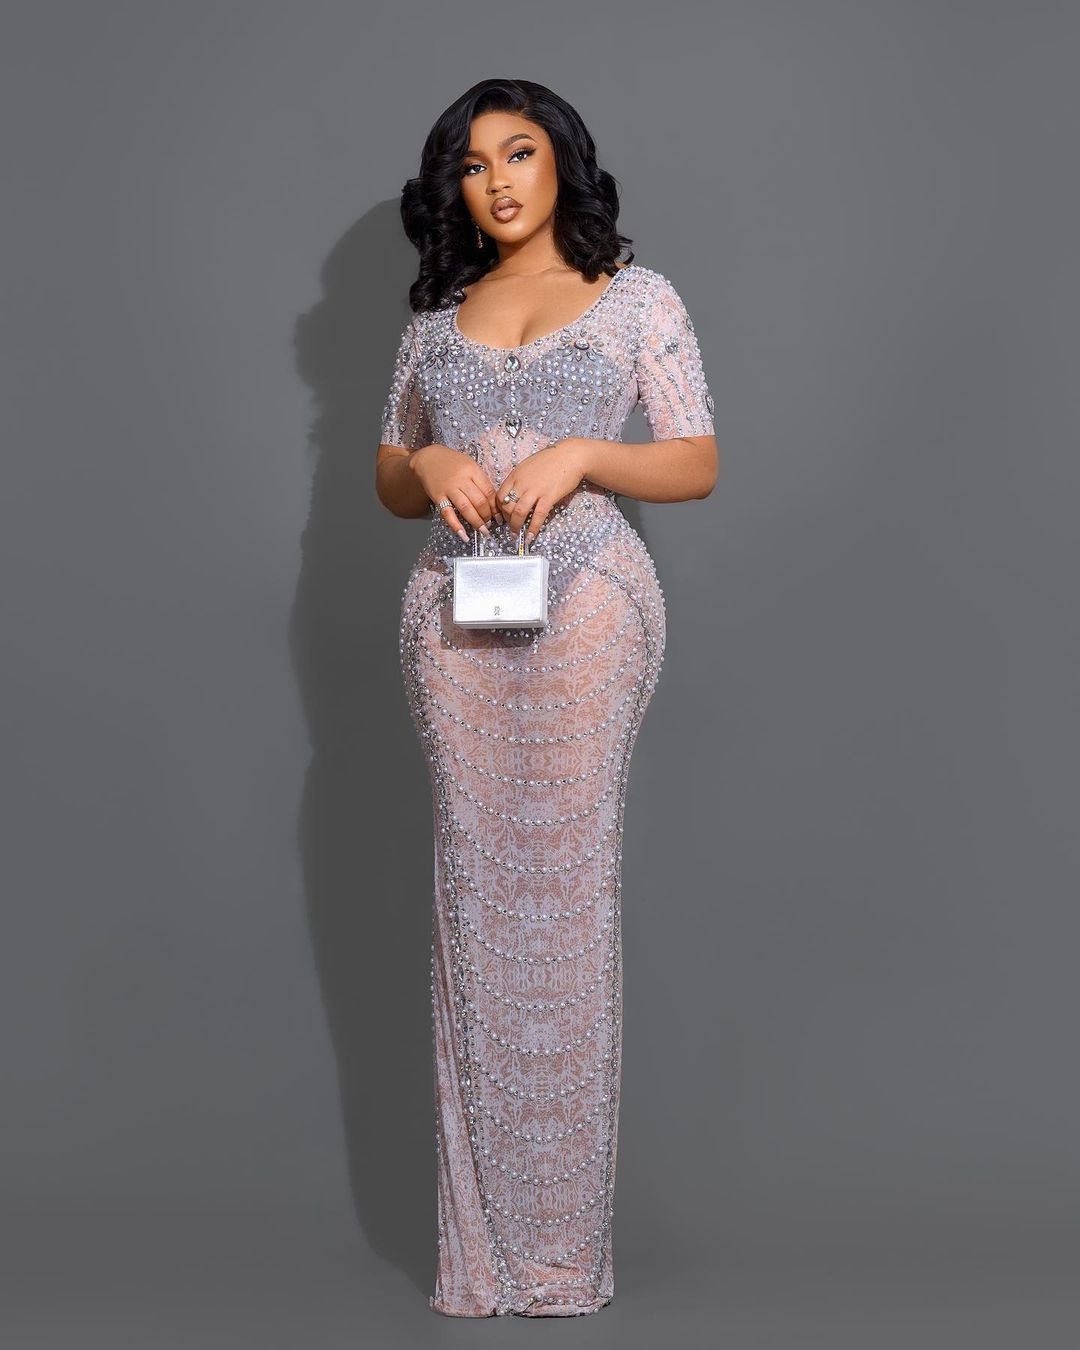 Adeola Adeyemi- Sleek And Elegant Gown That Can't Go Wrong